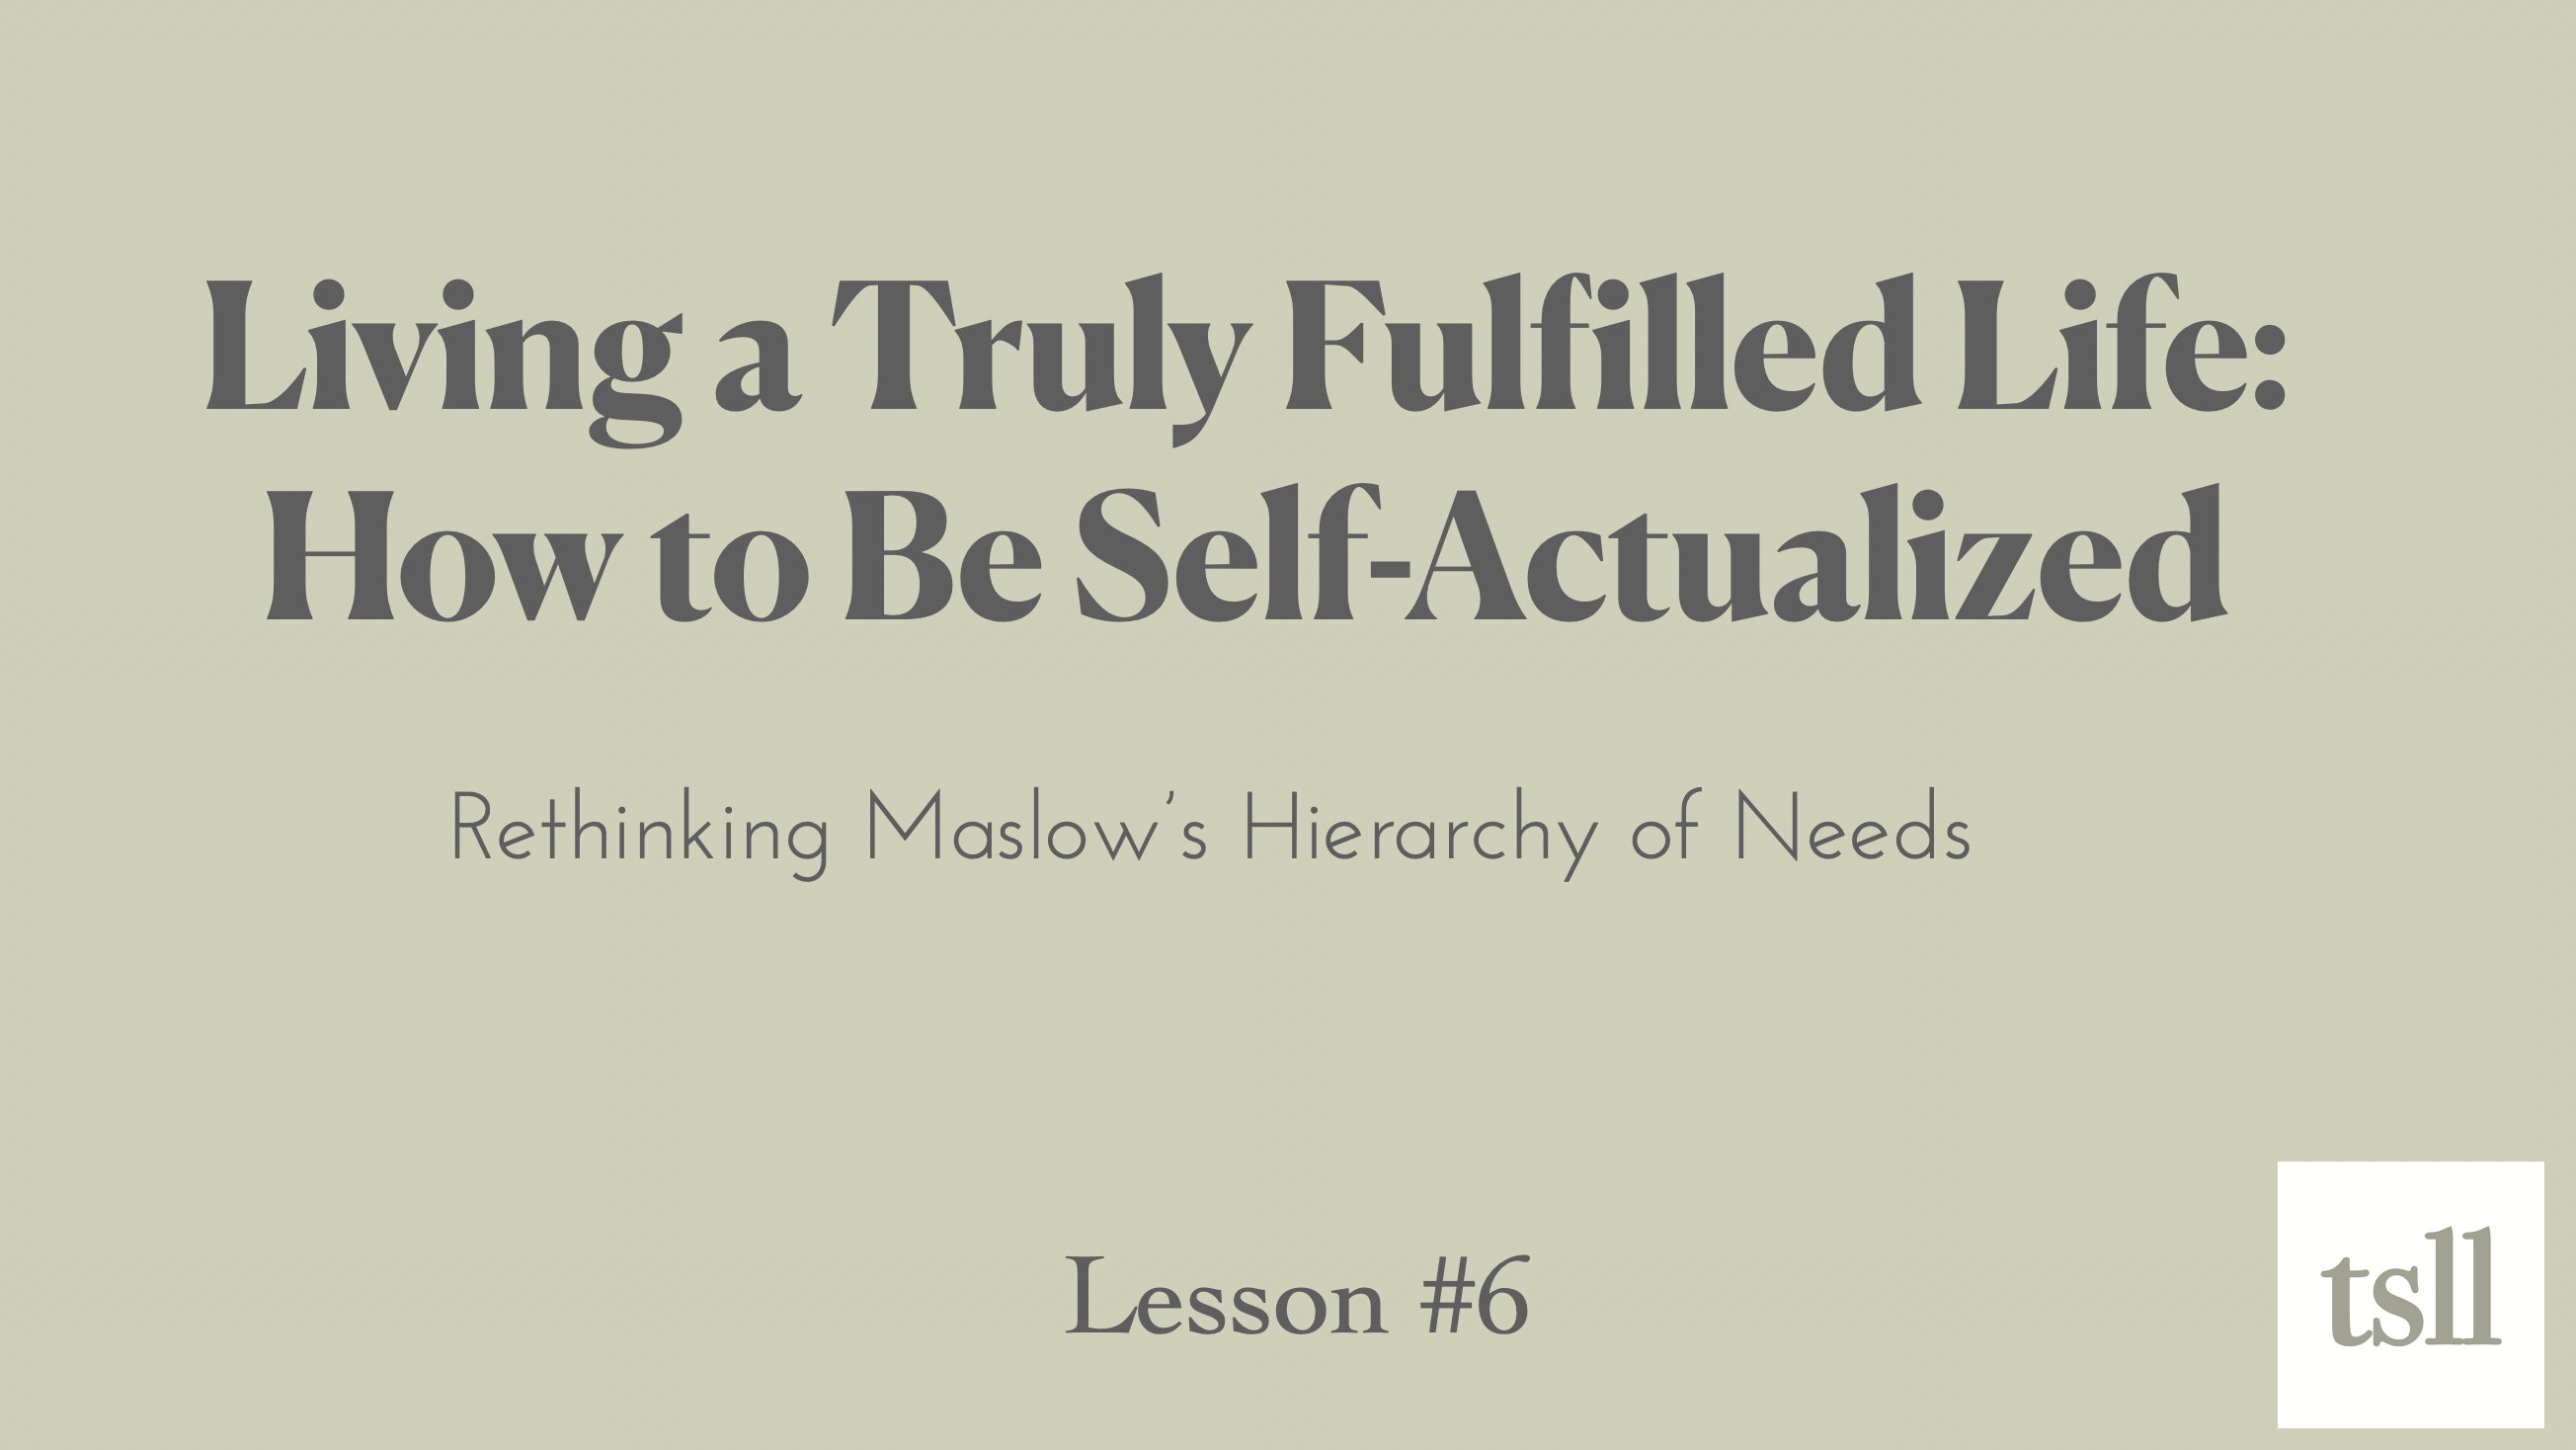 Part 9: How to Be Self-Actualized: Living a Truly Fulfilled Life (7:48)